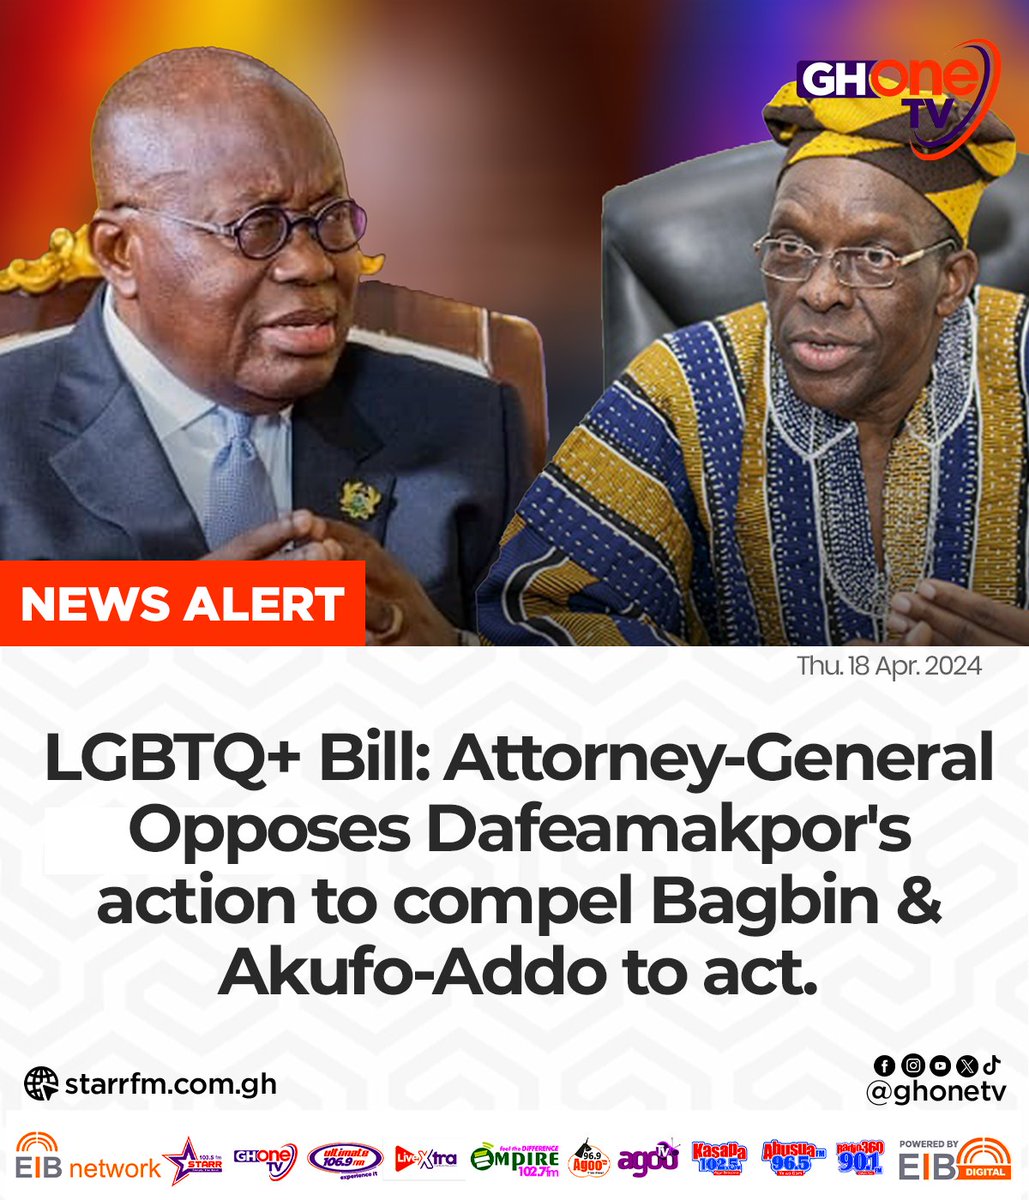 LGBTQ+ bill: AG opposes Dafeamakpor’s action to compel Bagbin, Akufo-Addo to act...
#empirefm